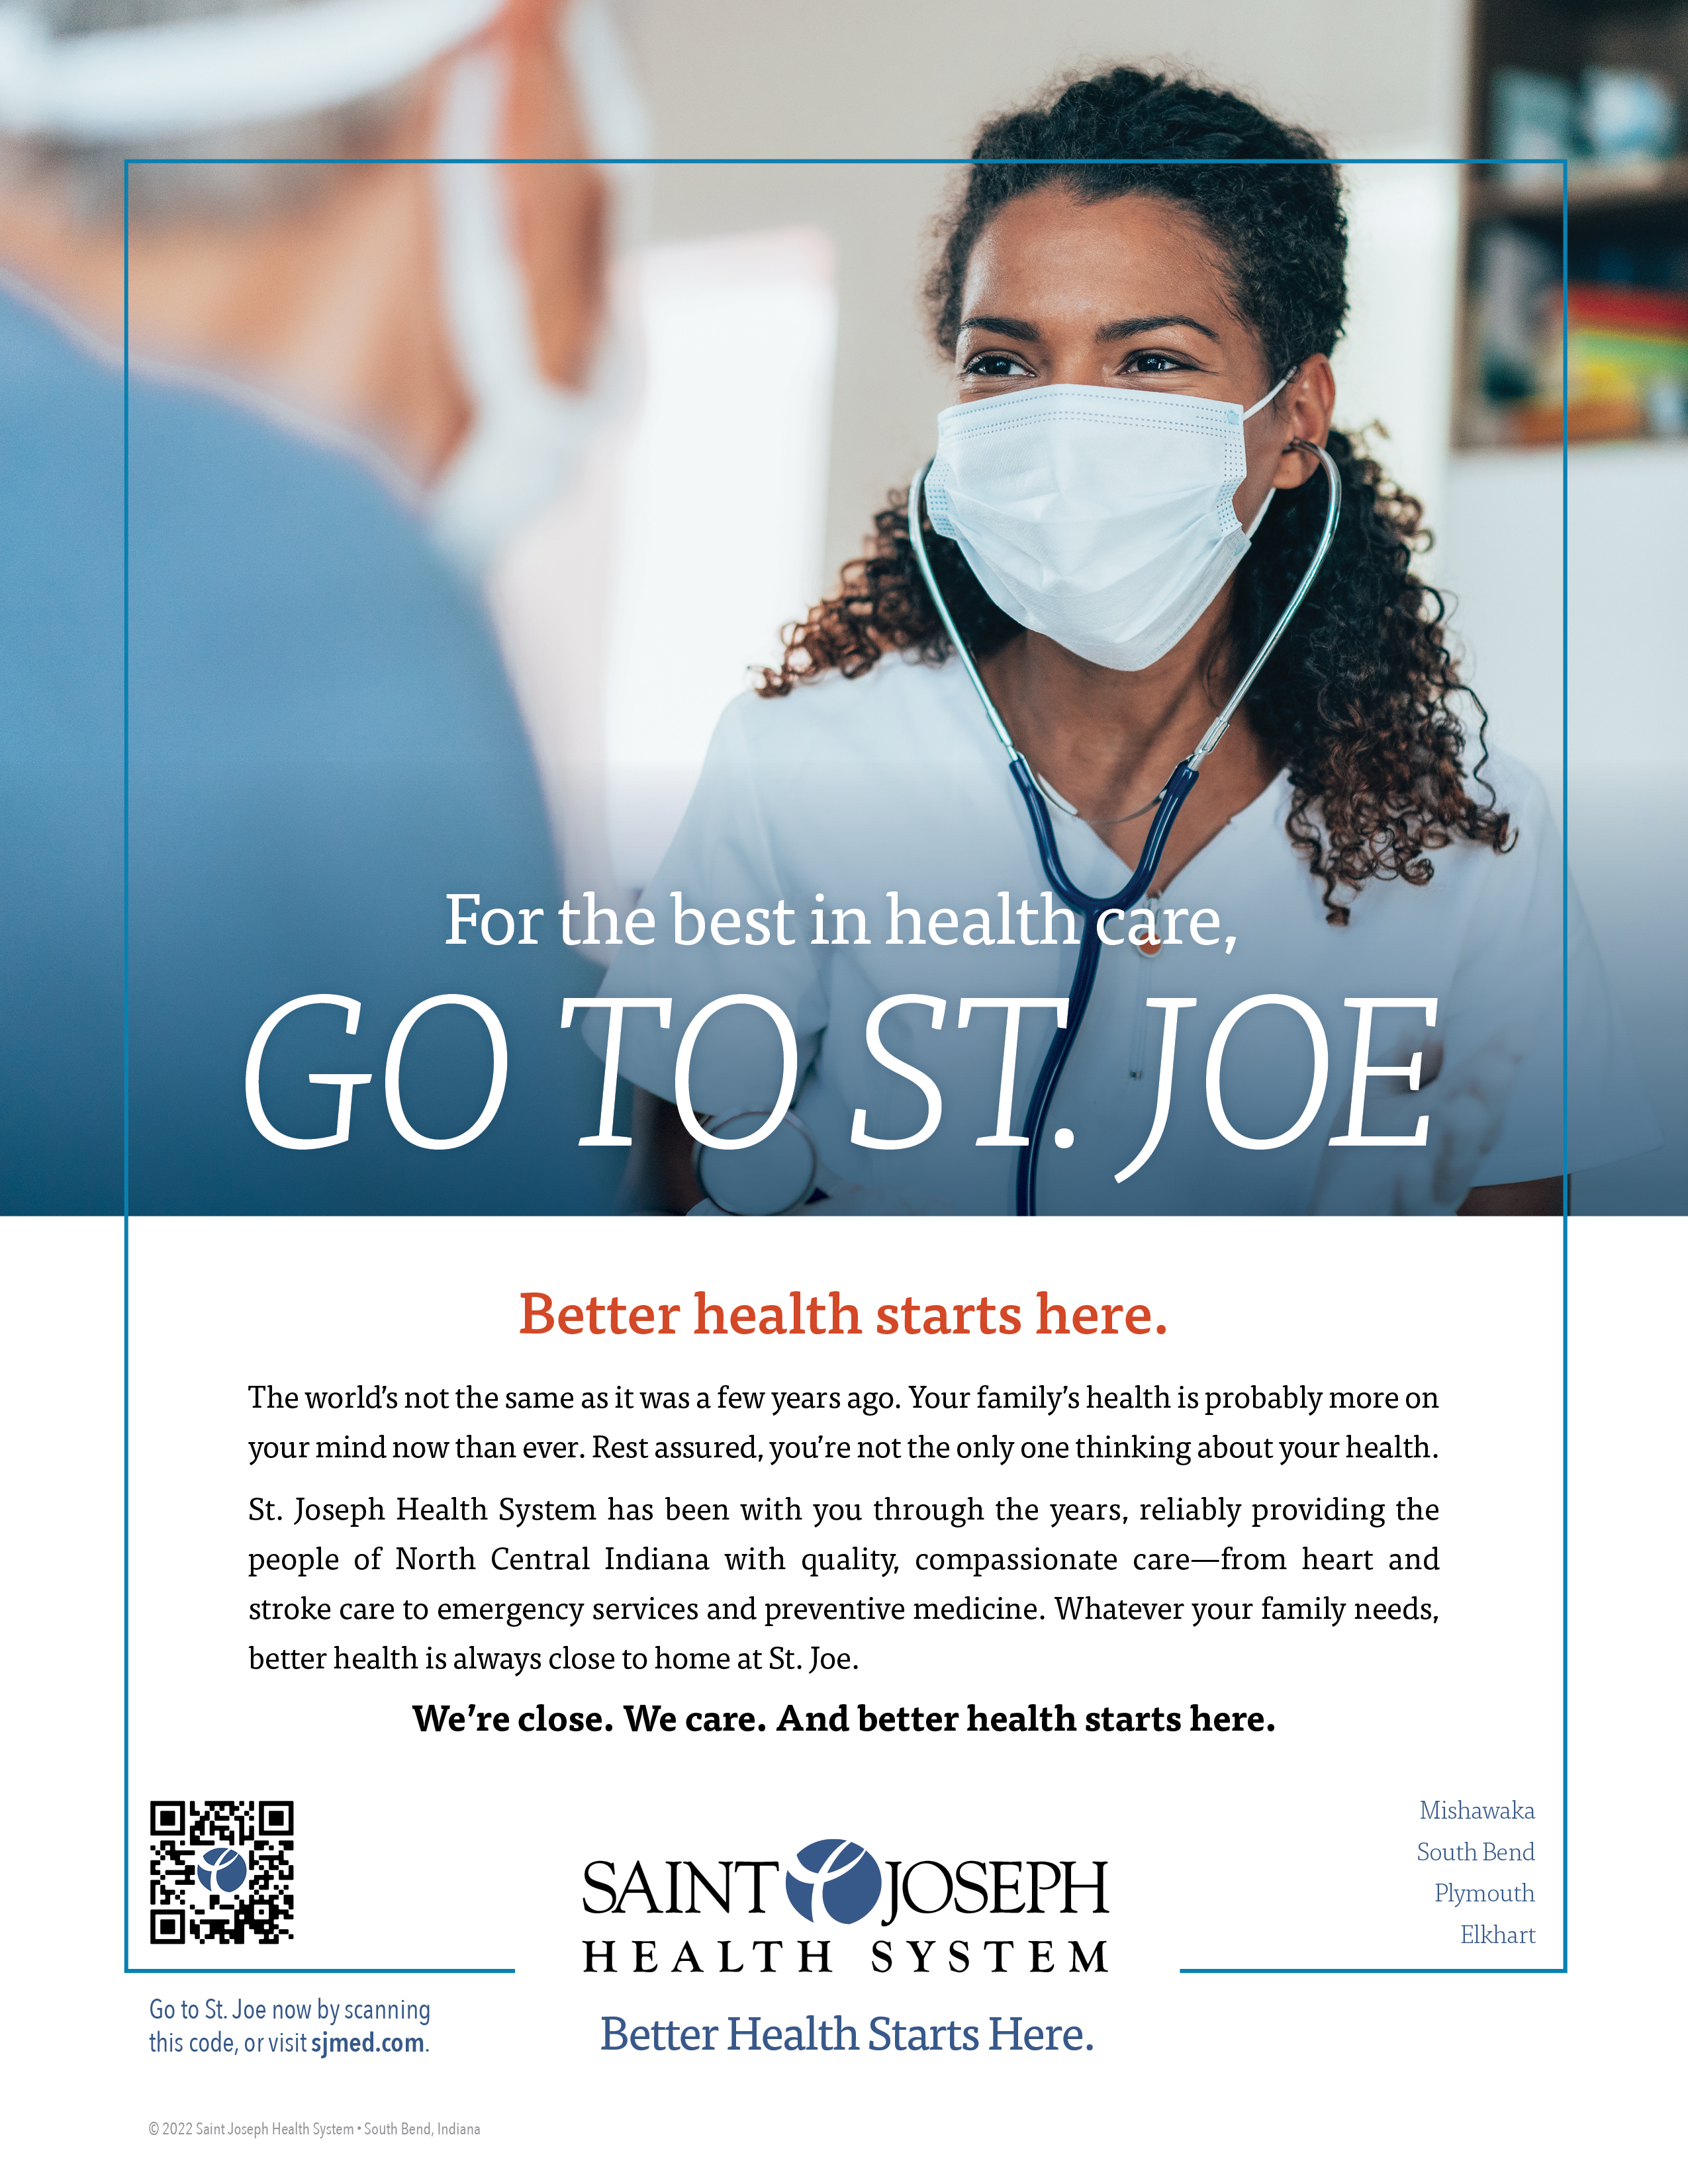 St. Joseph Health System print ad face covering